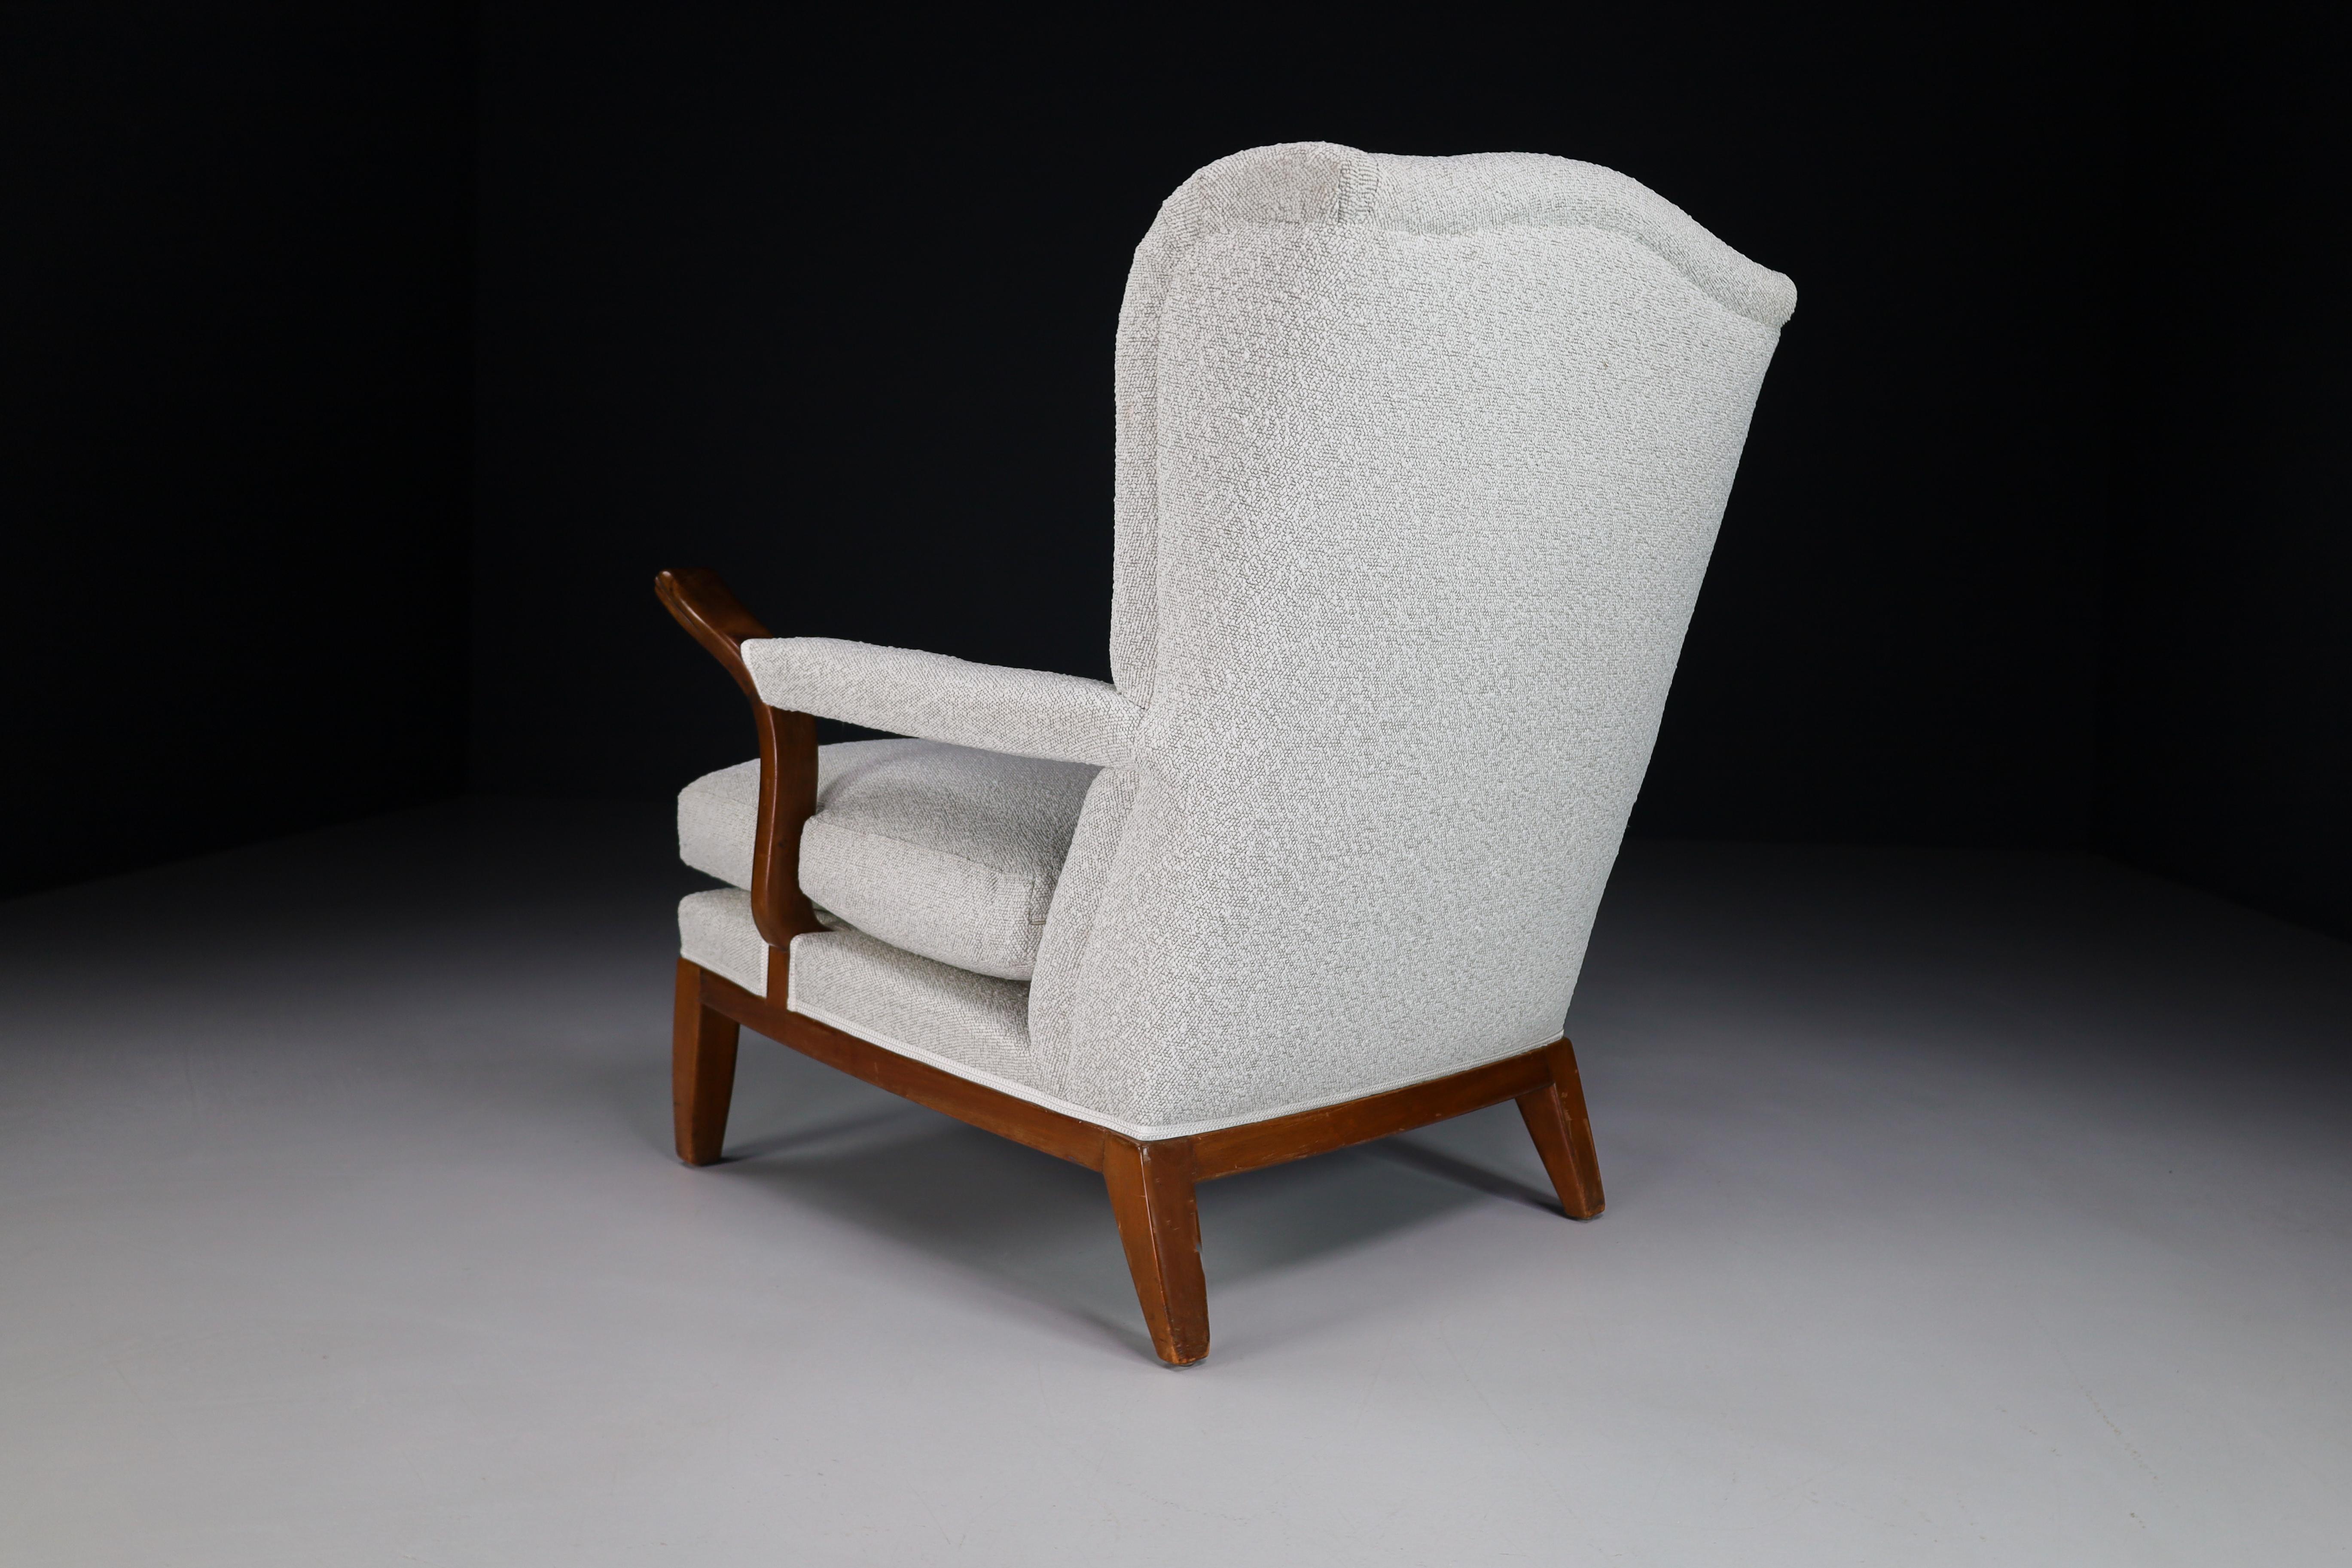 Large Wingback Chair in Walnut and New Bouclé Fabric, France, 1930s For Sale 6